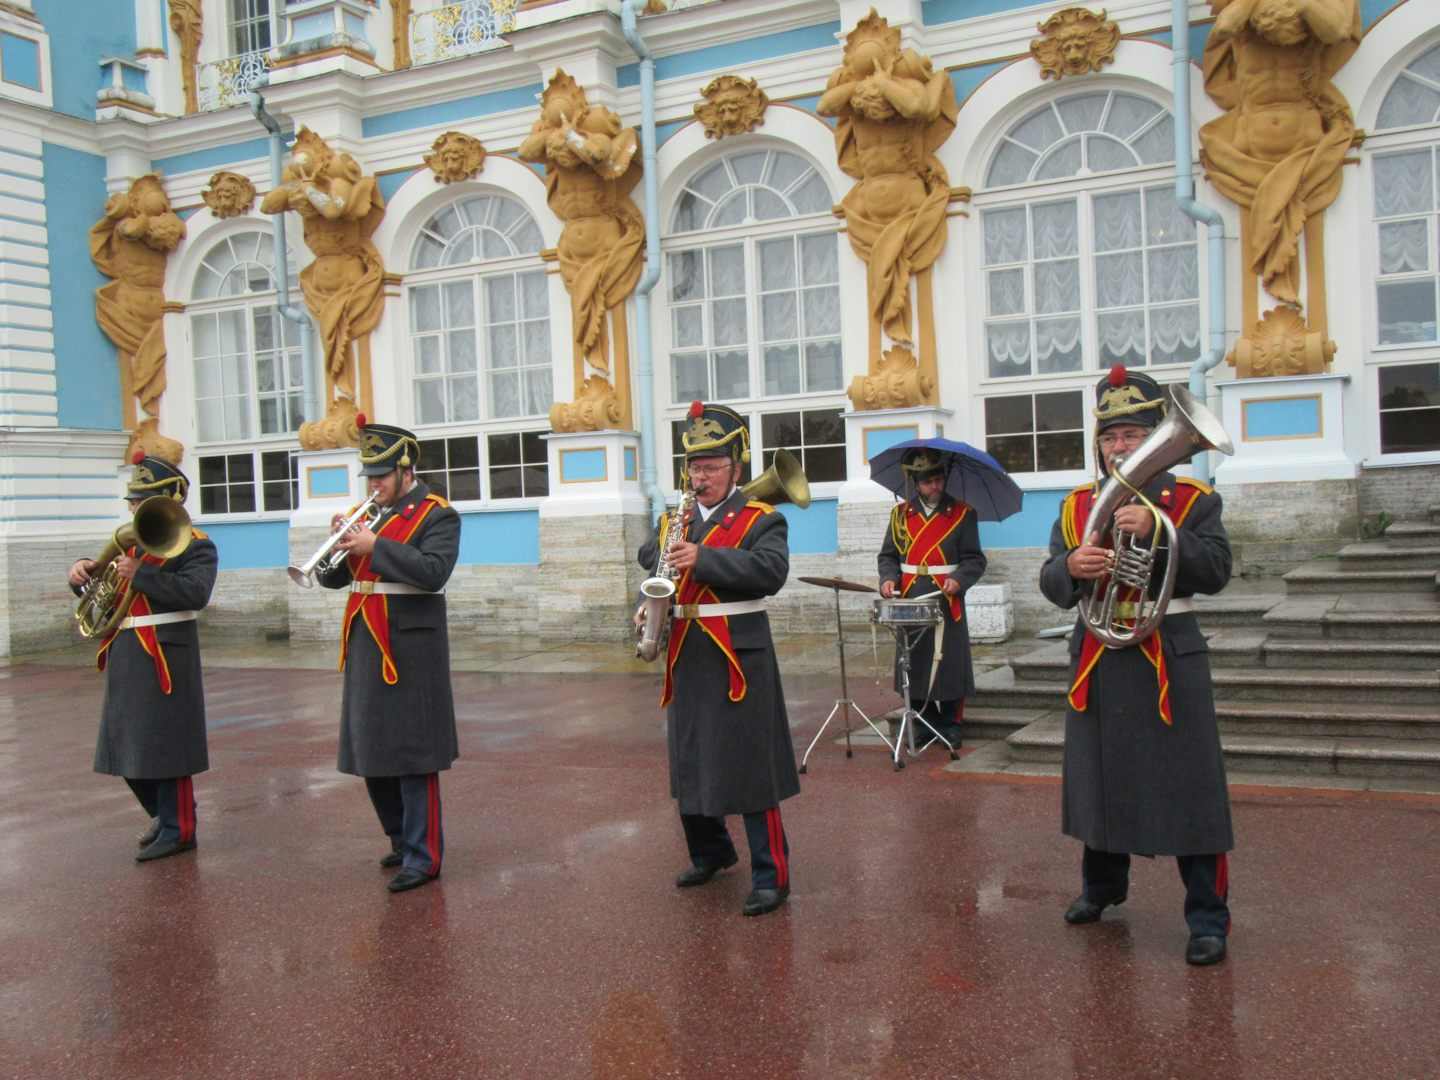 Musicians outside Catherine's Palace in St. Petersburg